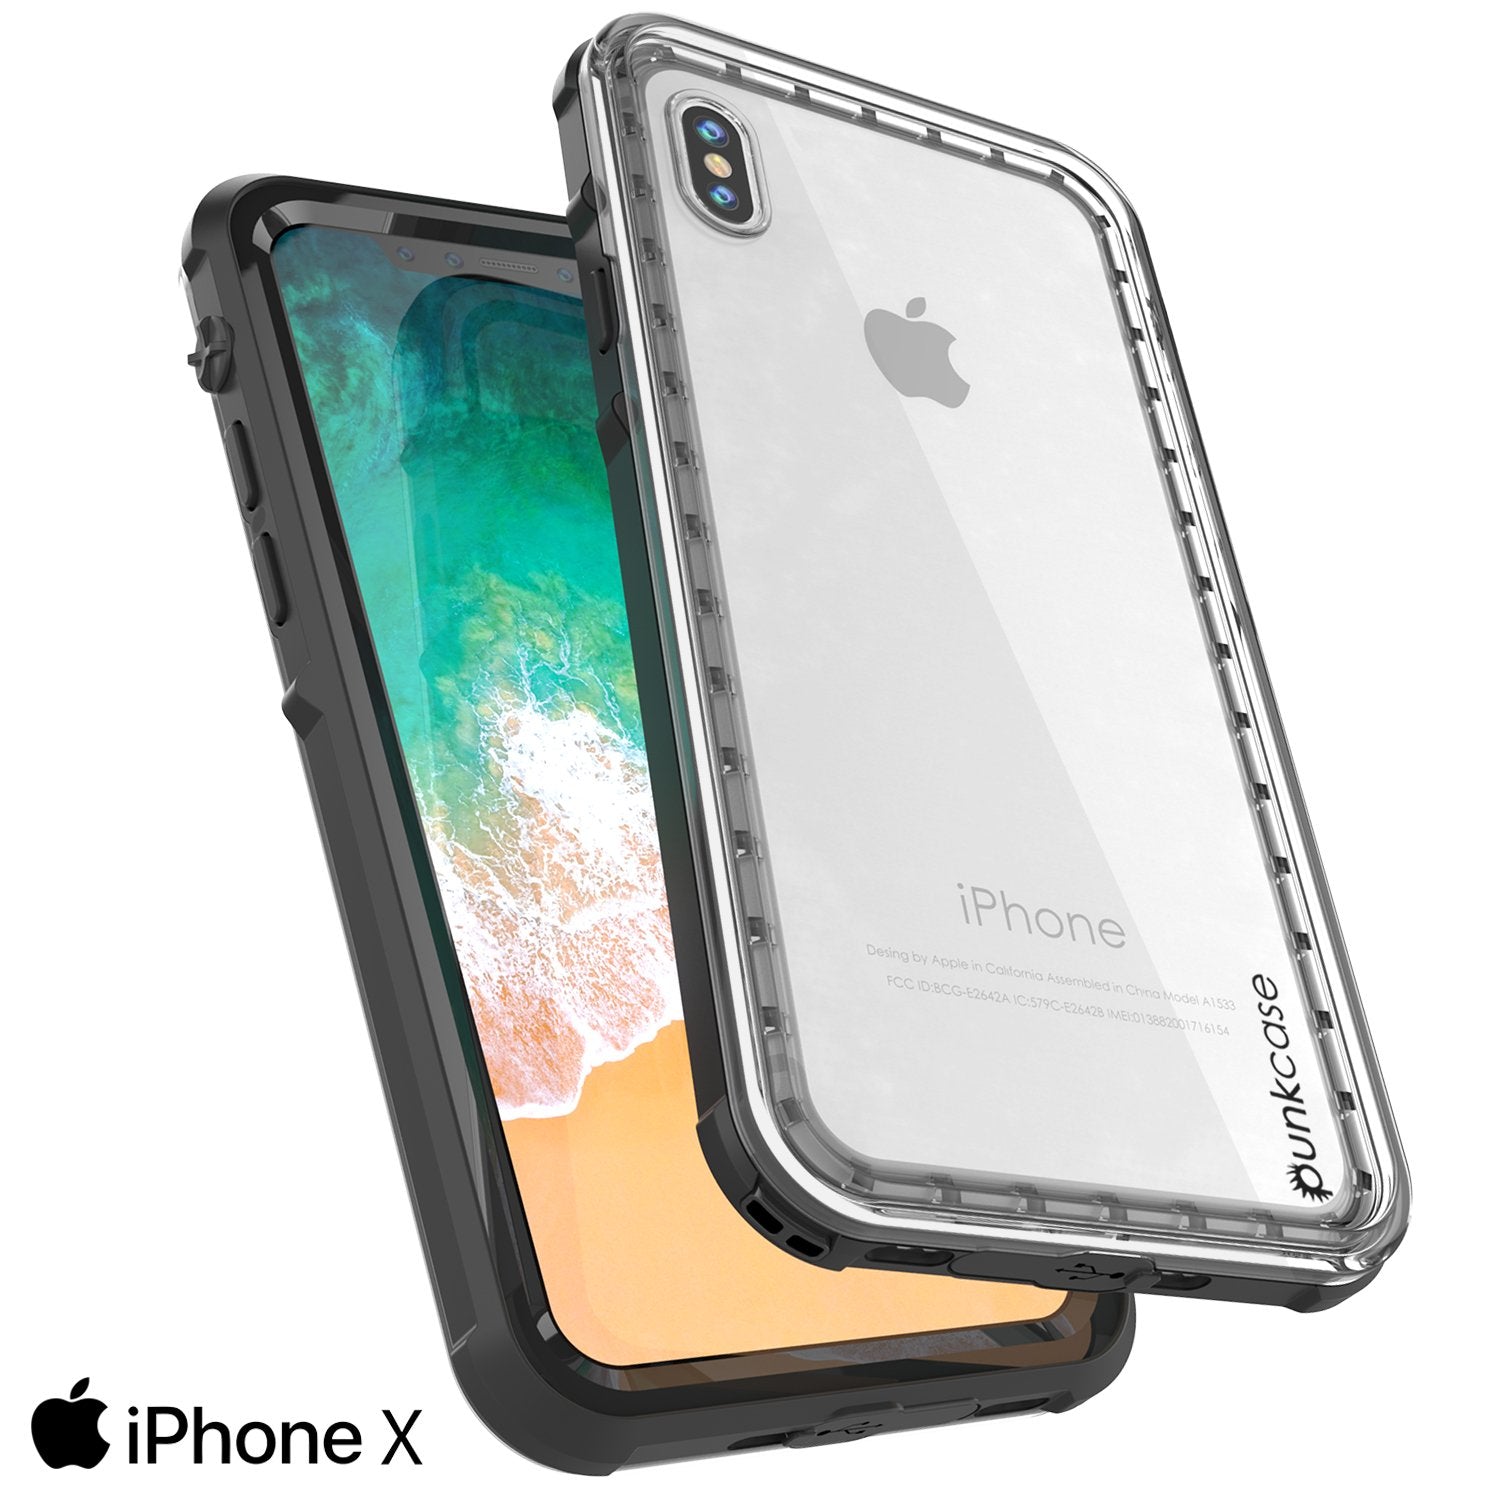 iPhone X Case, PUNKCase [CRYSTAL SERIES] Protective IP68 Certified Cover W/ Attached Screen Protector - DustPROOF, ShockPROOF, SnowPROOF - Ultra Slim Fit for Apple iPhone 10 [BLACK]